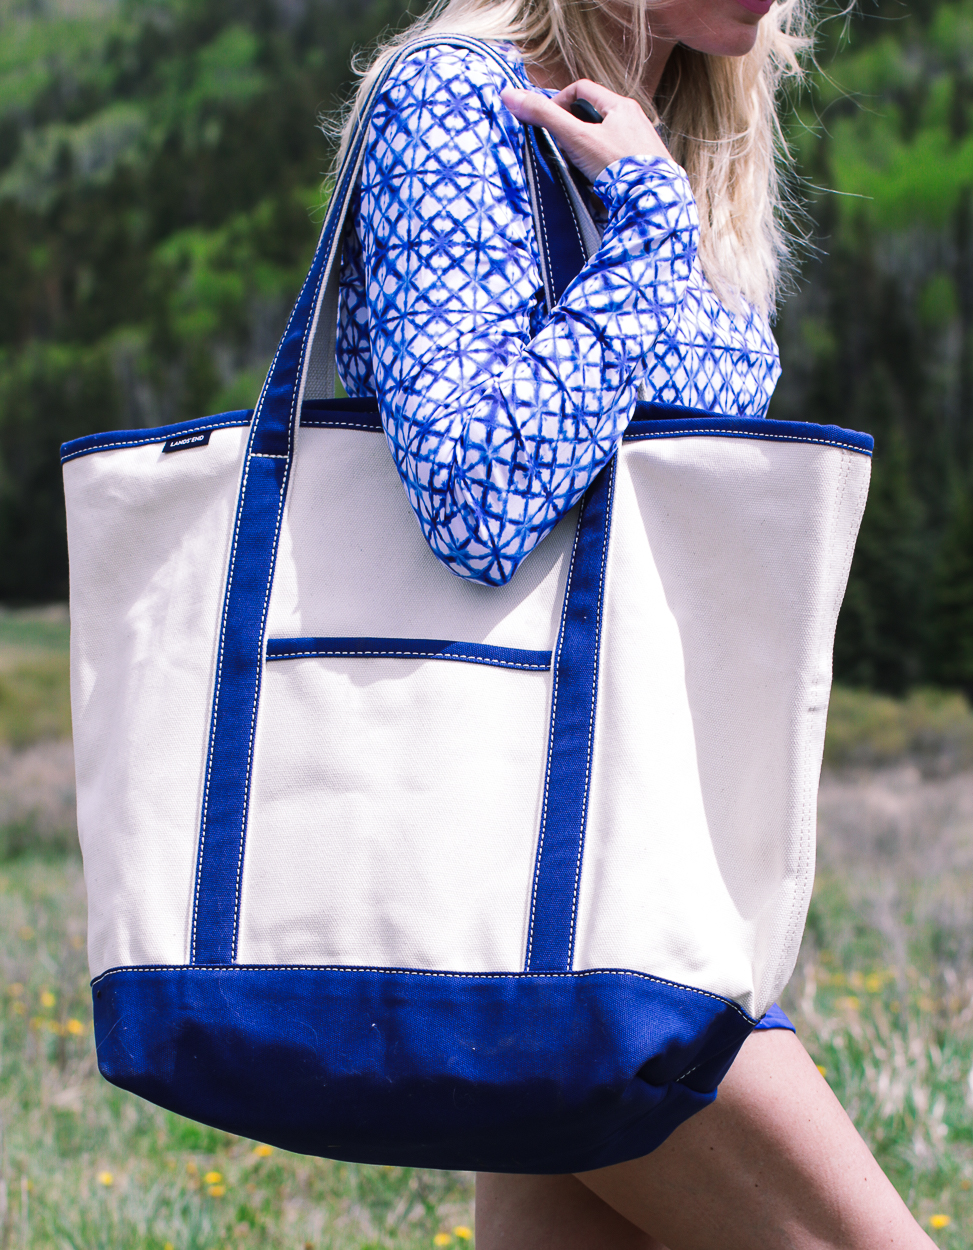 stylish swim shirts and skirts on blonde woman at lake in the mountains wearing a bright blue swim skirt, white button down crinkled cotton swim cover up and a canvas blue and white tote